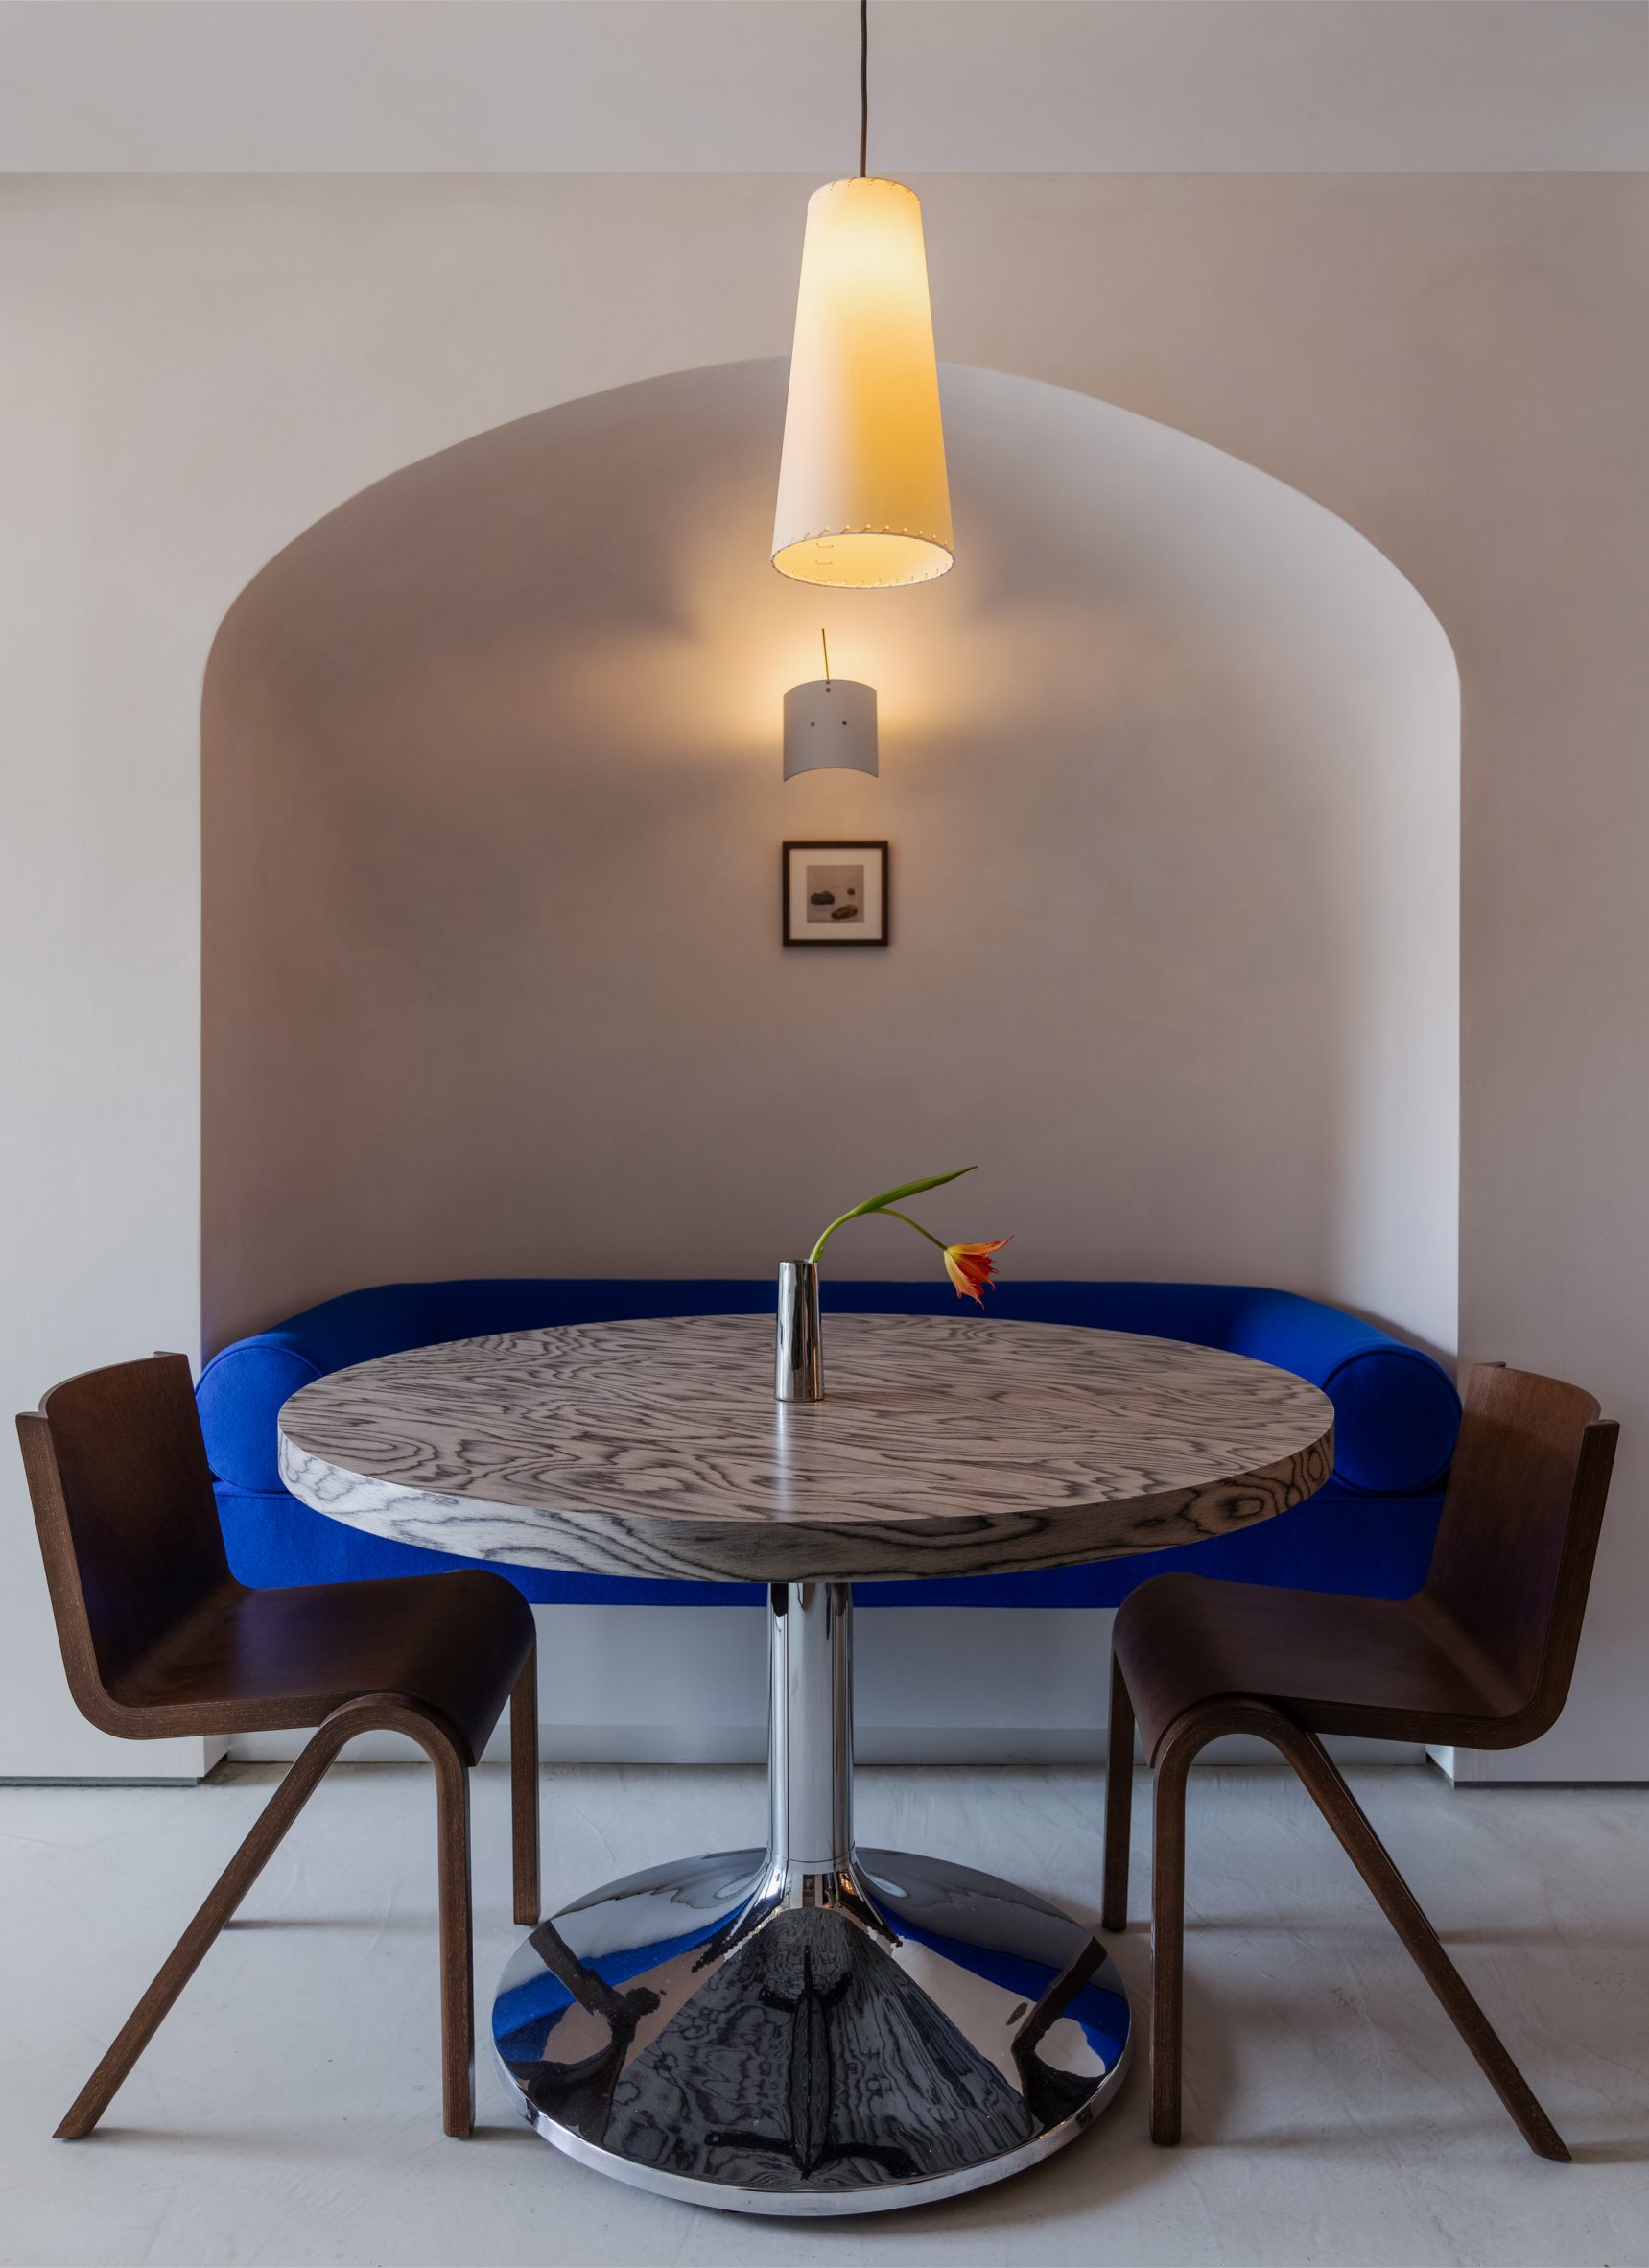 Dining niche with cobalt blue seat cushions